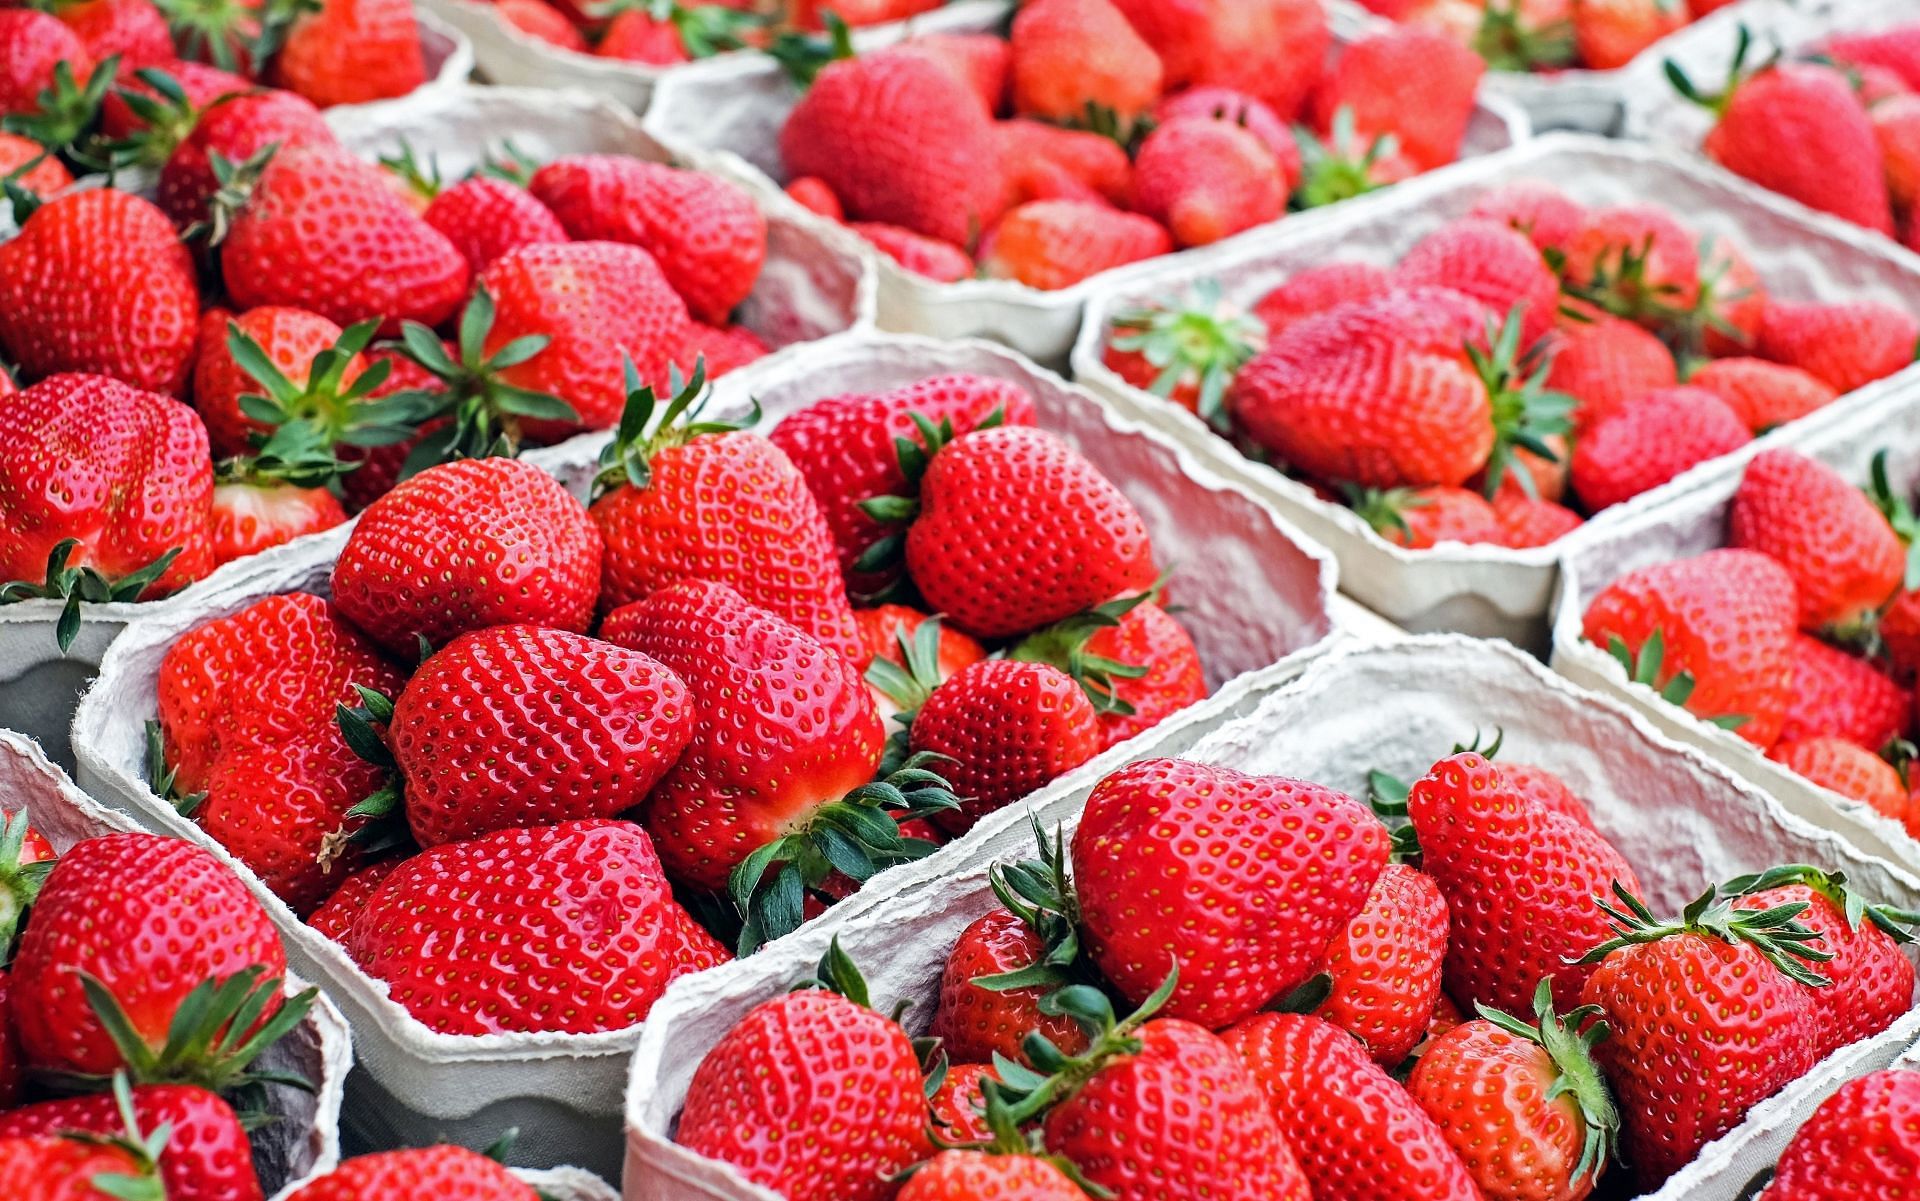 Each strawberry is a receptacle, in which 200 or more fruits are embedded together. (Image via Pexels/Pixabay)